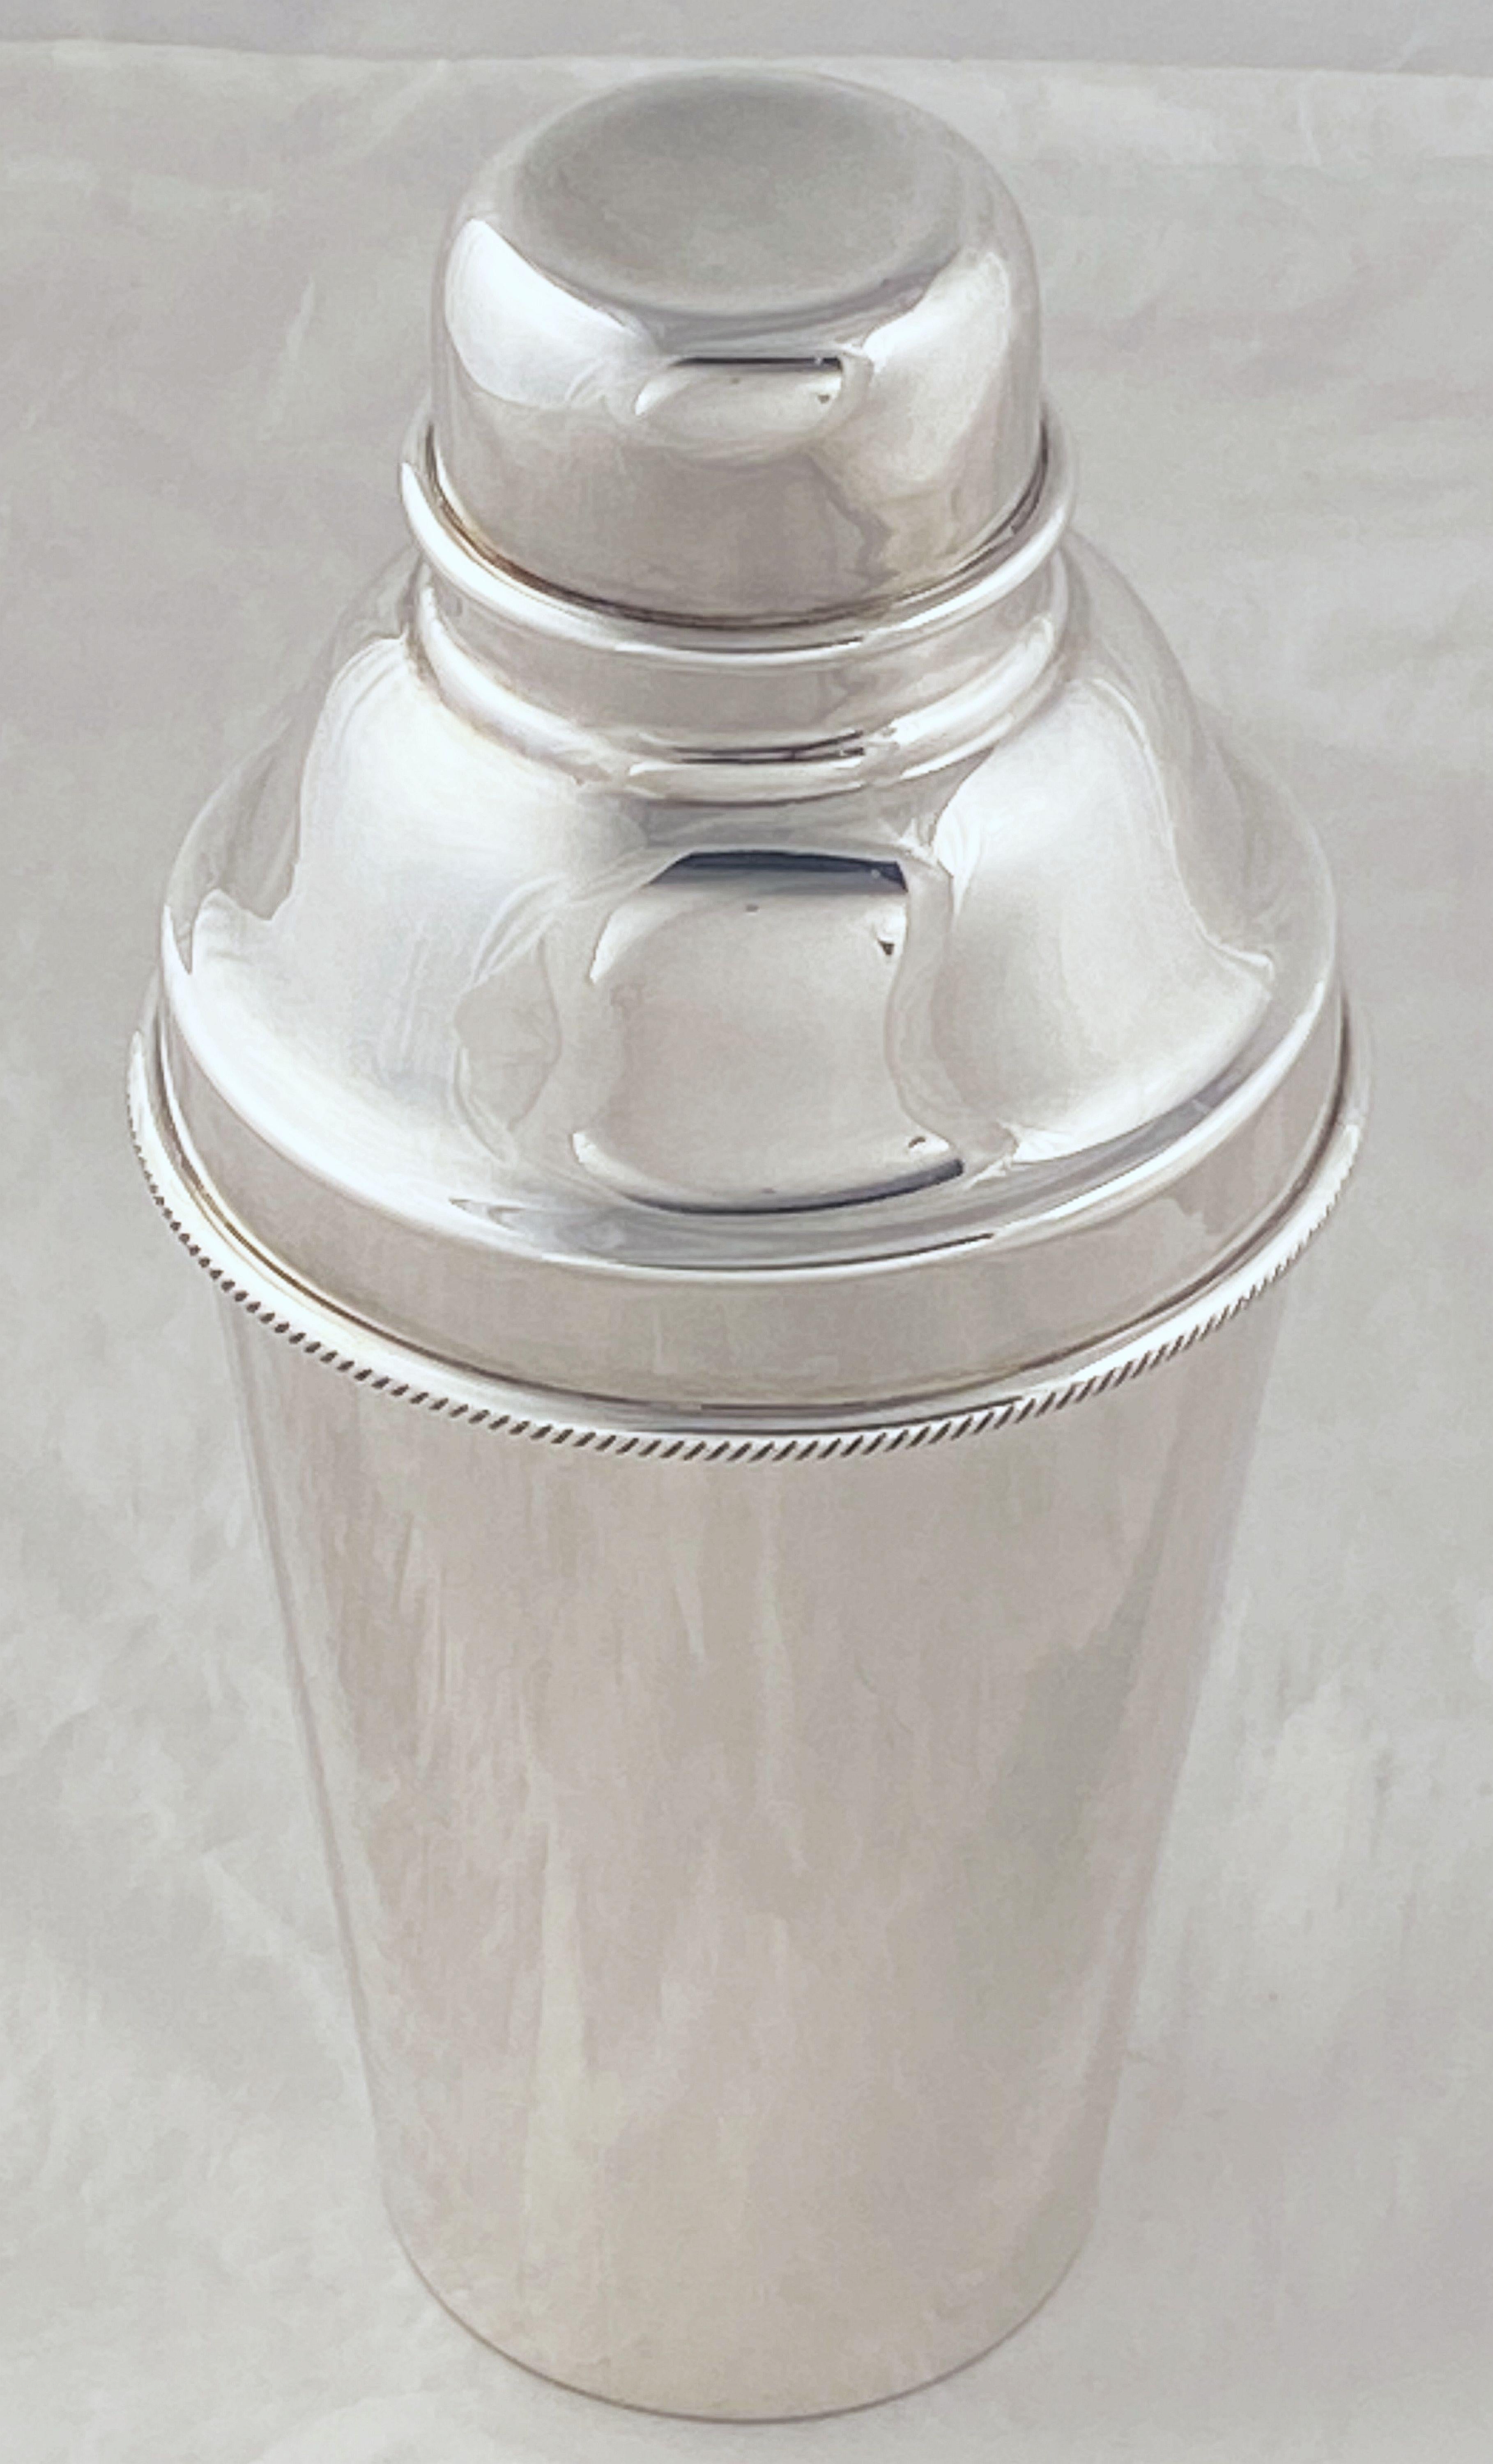 A vintage English cylindrical martini or cocktail shaker of fine plate silver from the Art Deco period, with engine-turned removable CAP and strainer.

Marked on base: EPNS (Pineapple) for Barker-Ellis, Birmingham, UK

Barker-Ellis was